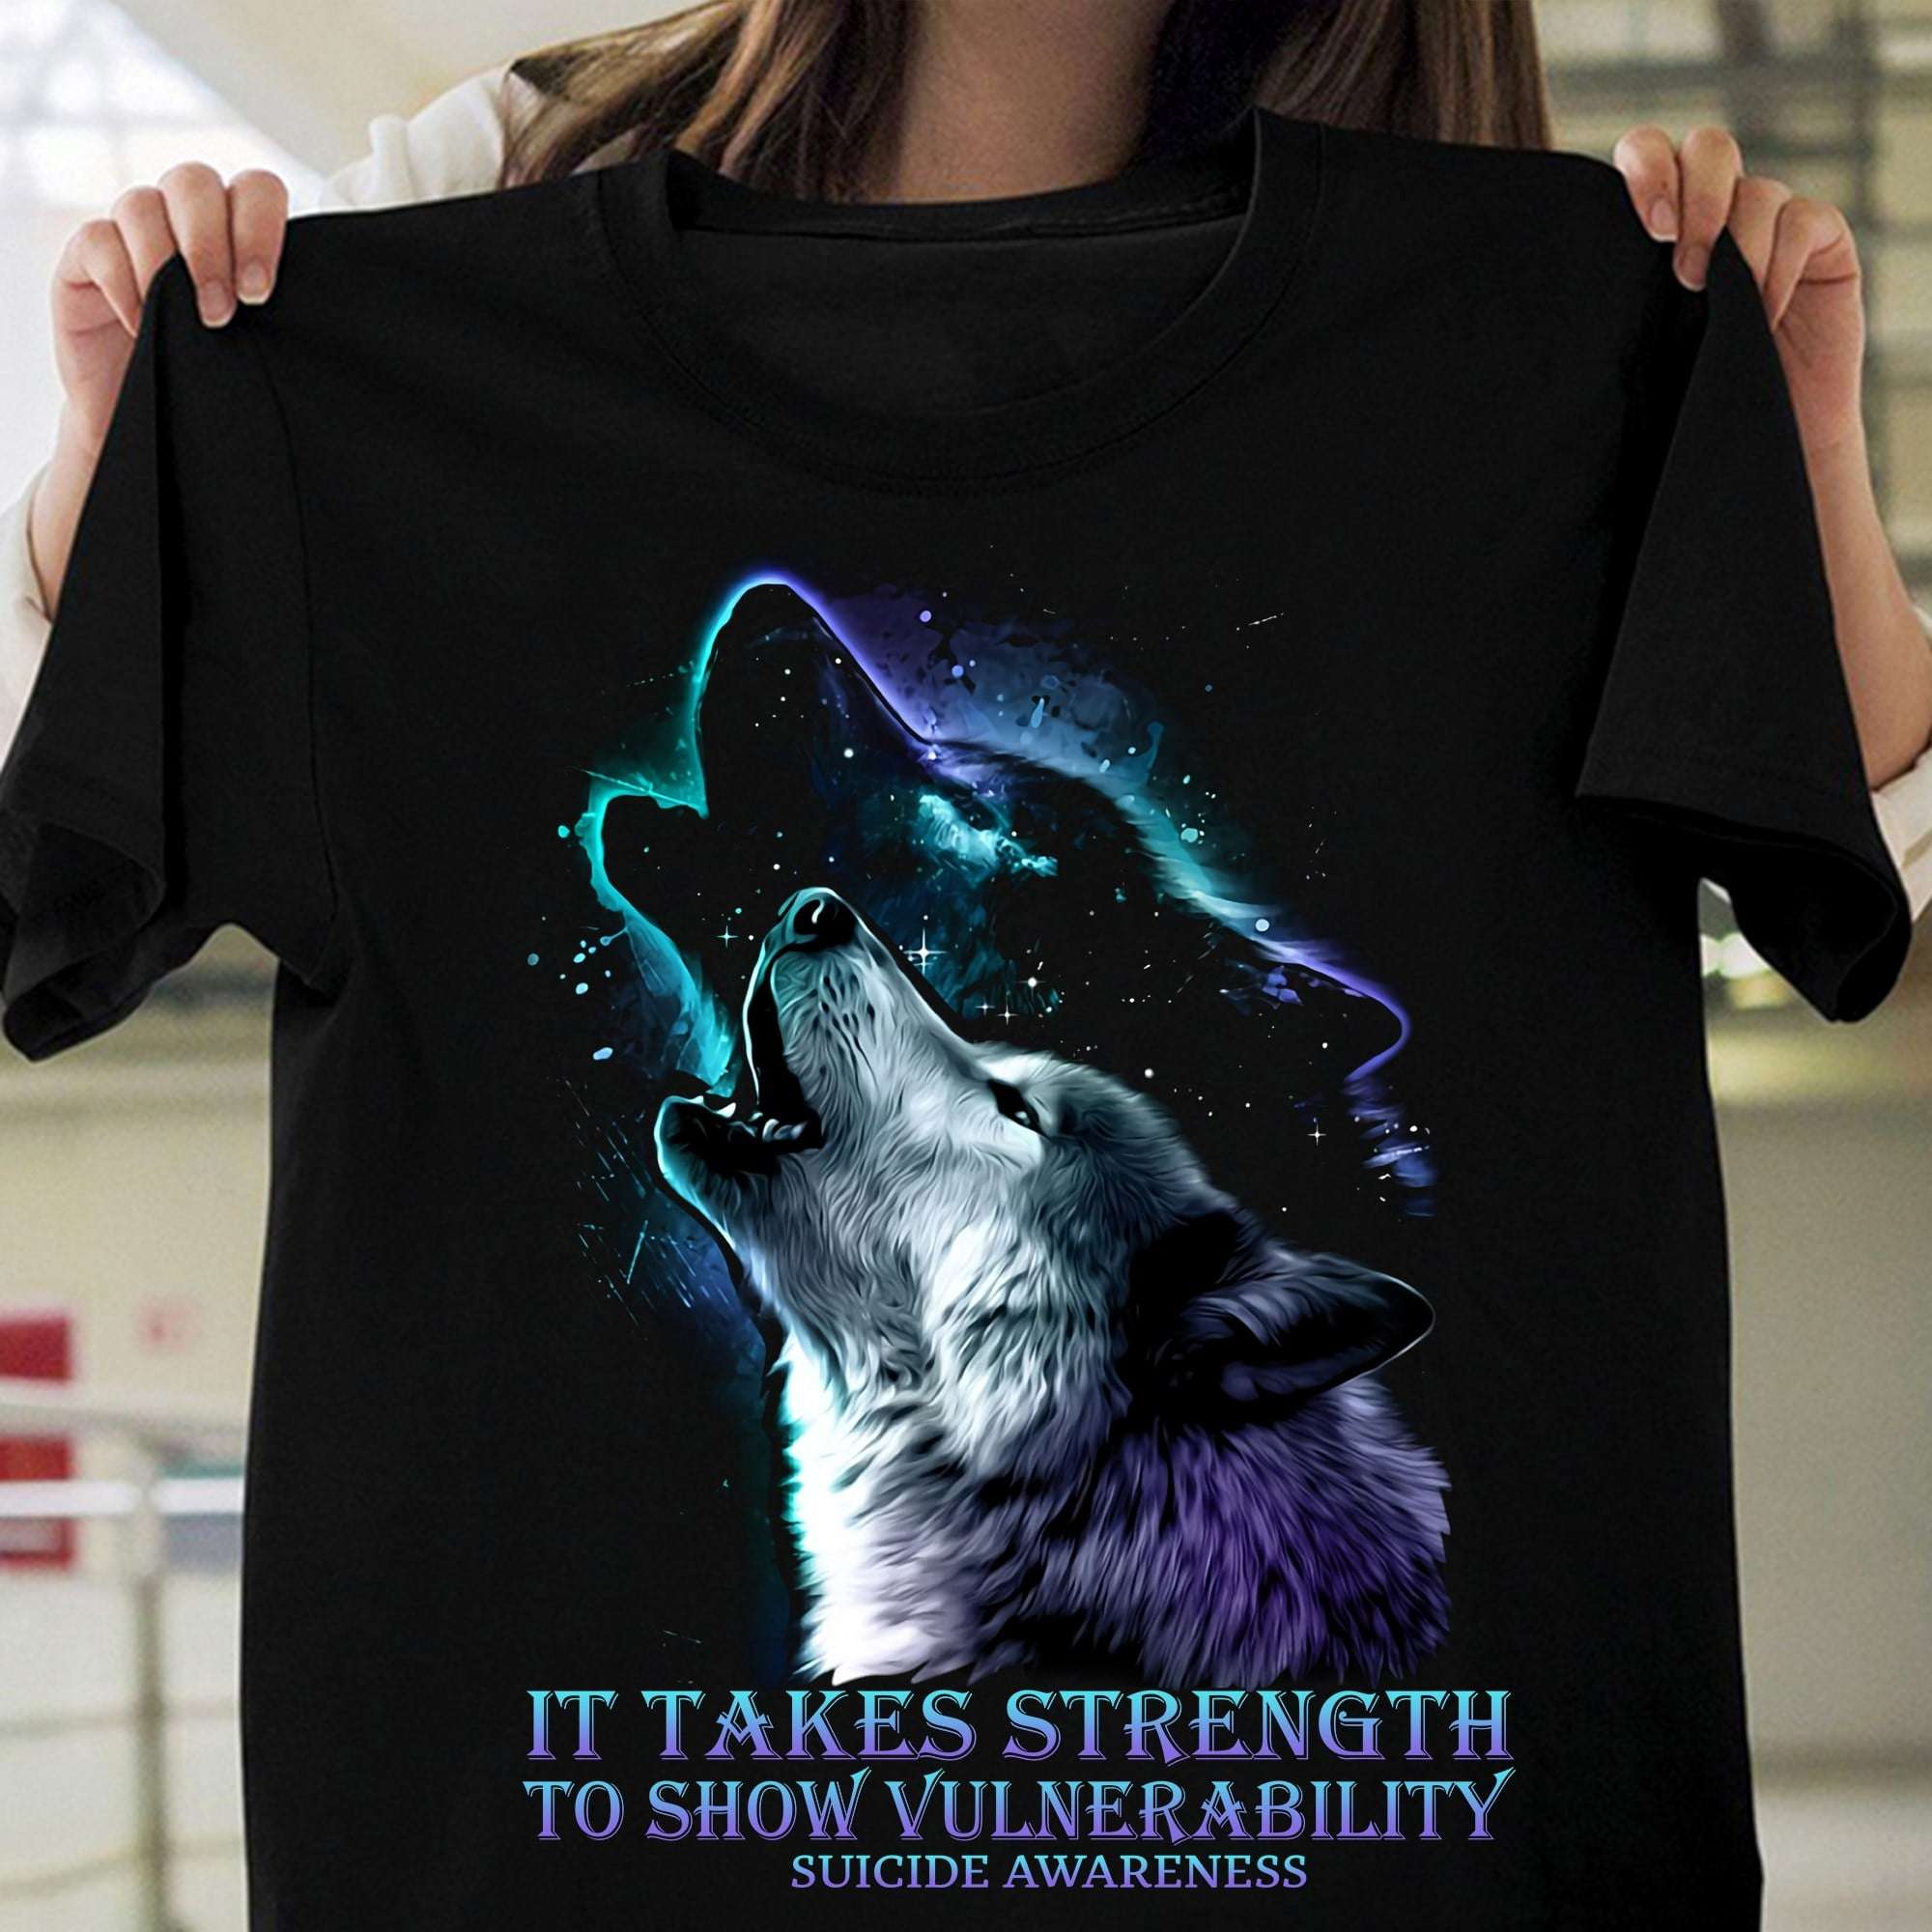 It takes strength to show vunerability - Suicide awareness, wolf ...